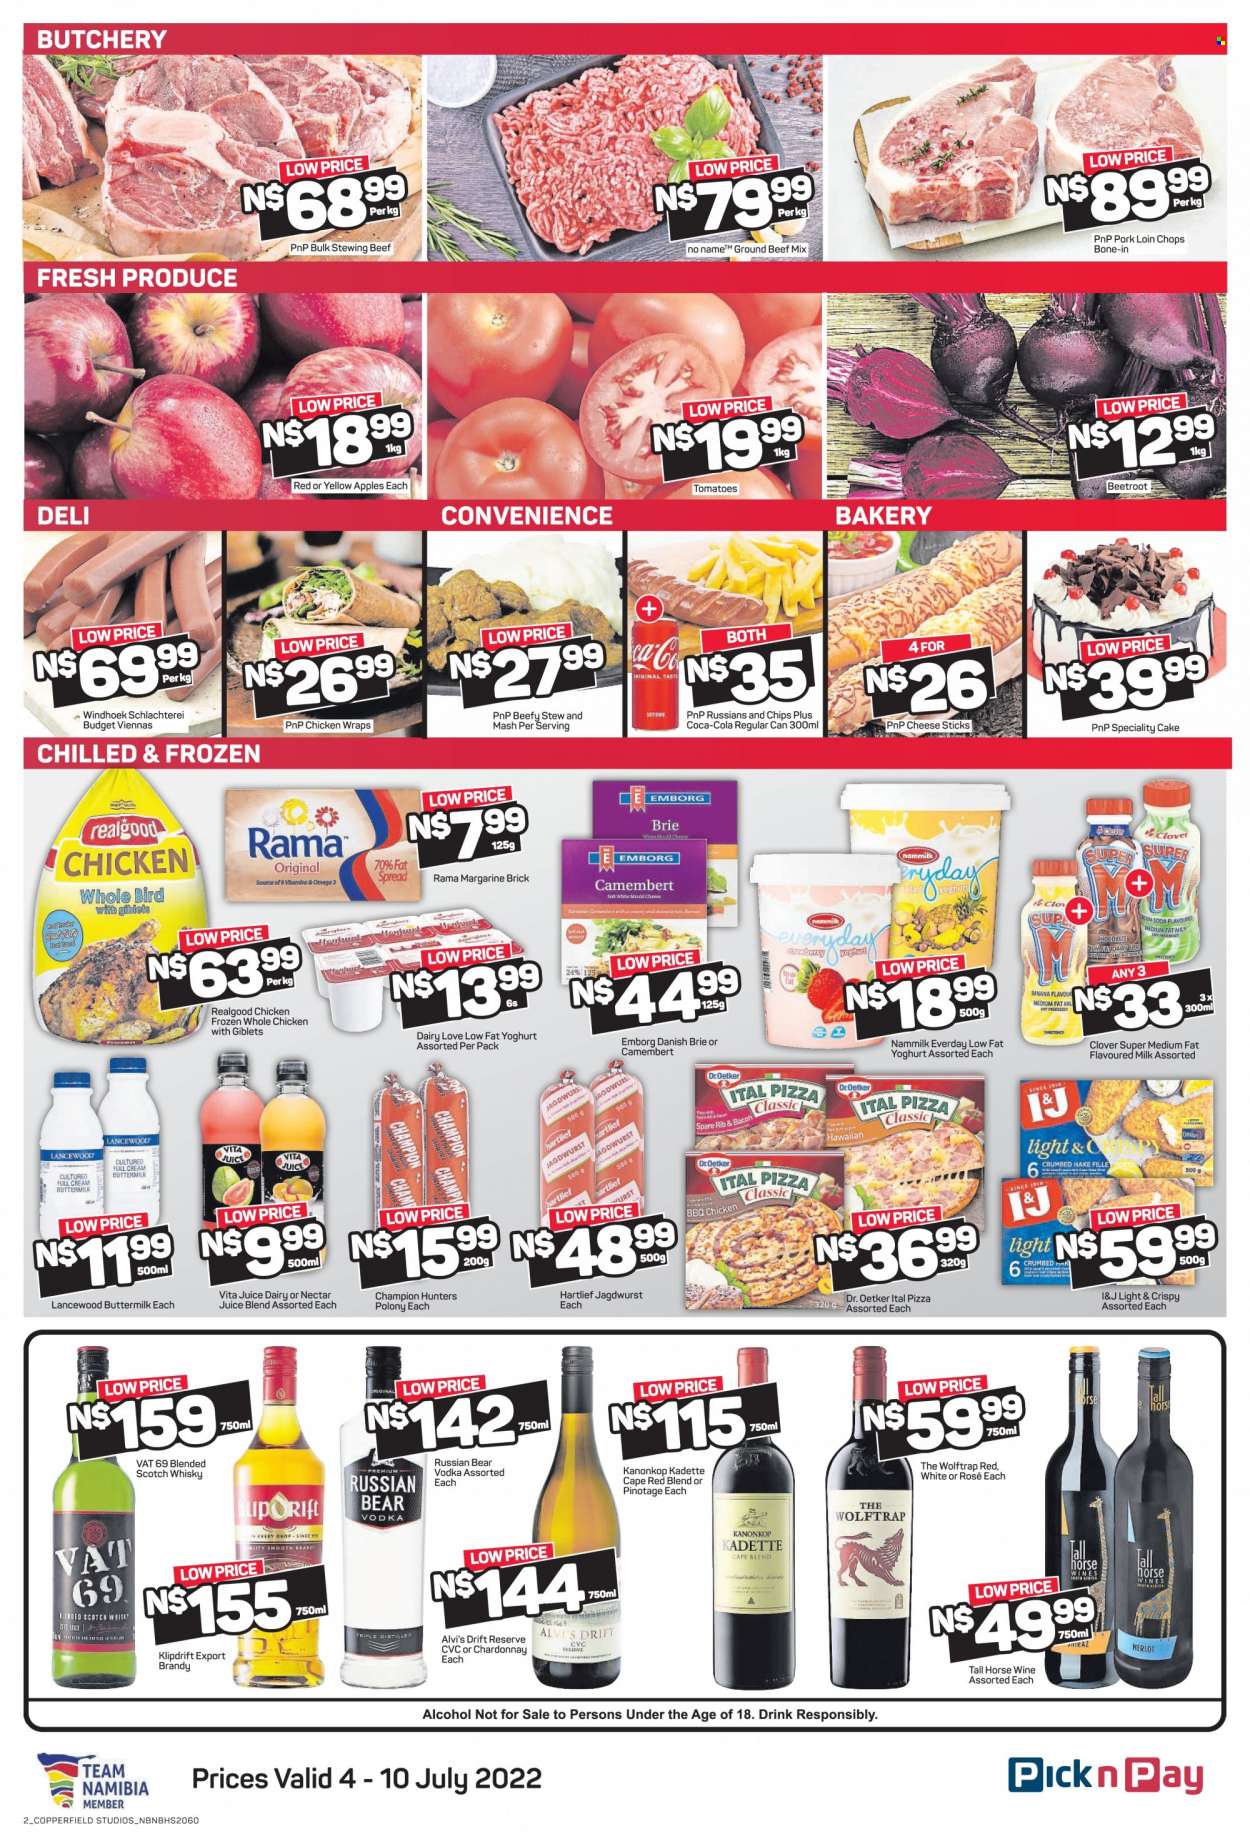 Pick n Pay catalogue  - 04/07/2022 - 10/07/2022 - Sales products - cake, wraps, beetroot, apples, hake, pizza, bacon, polony, vienna sausage, russians, camembert, brie cheese, Dr. Oetker, Lancewood, yoghurt, buttermilk, flavoured milk, margarine, fat spread, Rama, cheese Sticks, Ital Pizza, chocolate, Coca-Cola, juice, soda, red wine, white wine, Chardonnay, wine, Merlot, alcohol, Kanonkop Kadette, rosé wine, brandy, vodka, Russian Bear, Klipdrift, Vat 69, scotch whisky, whisky, whole chicken, chicken meat, beef meat, ground beef, stewing beef, pork chops, pork loin, pork meat. Page 2.